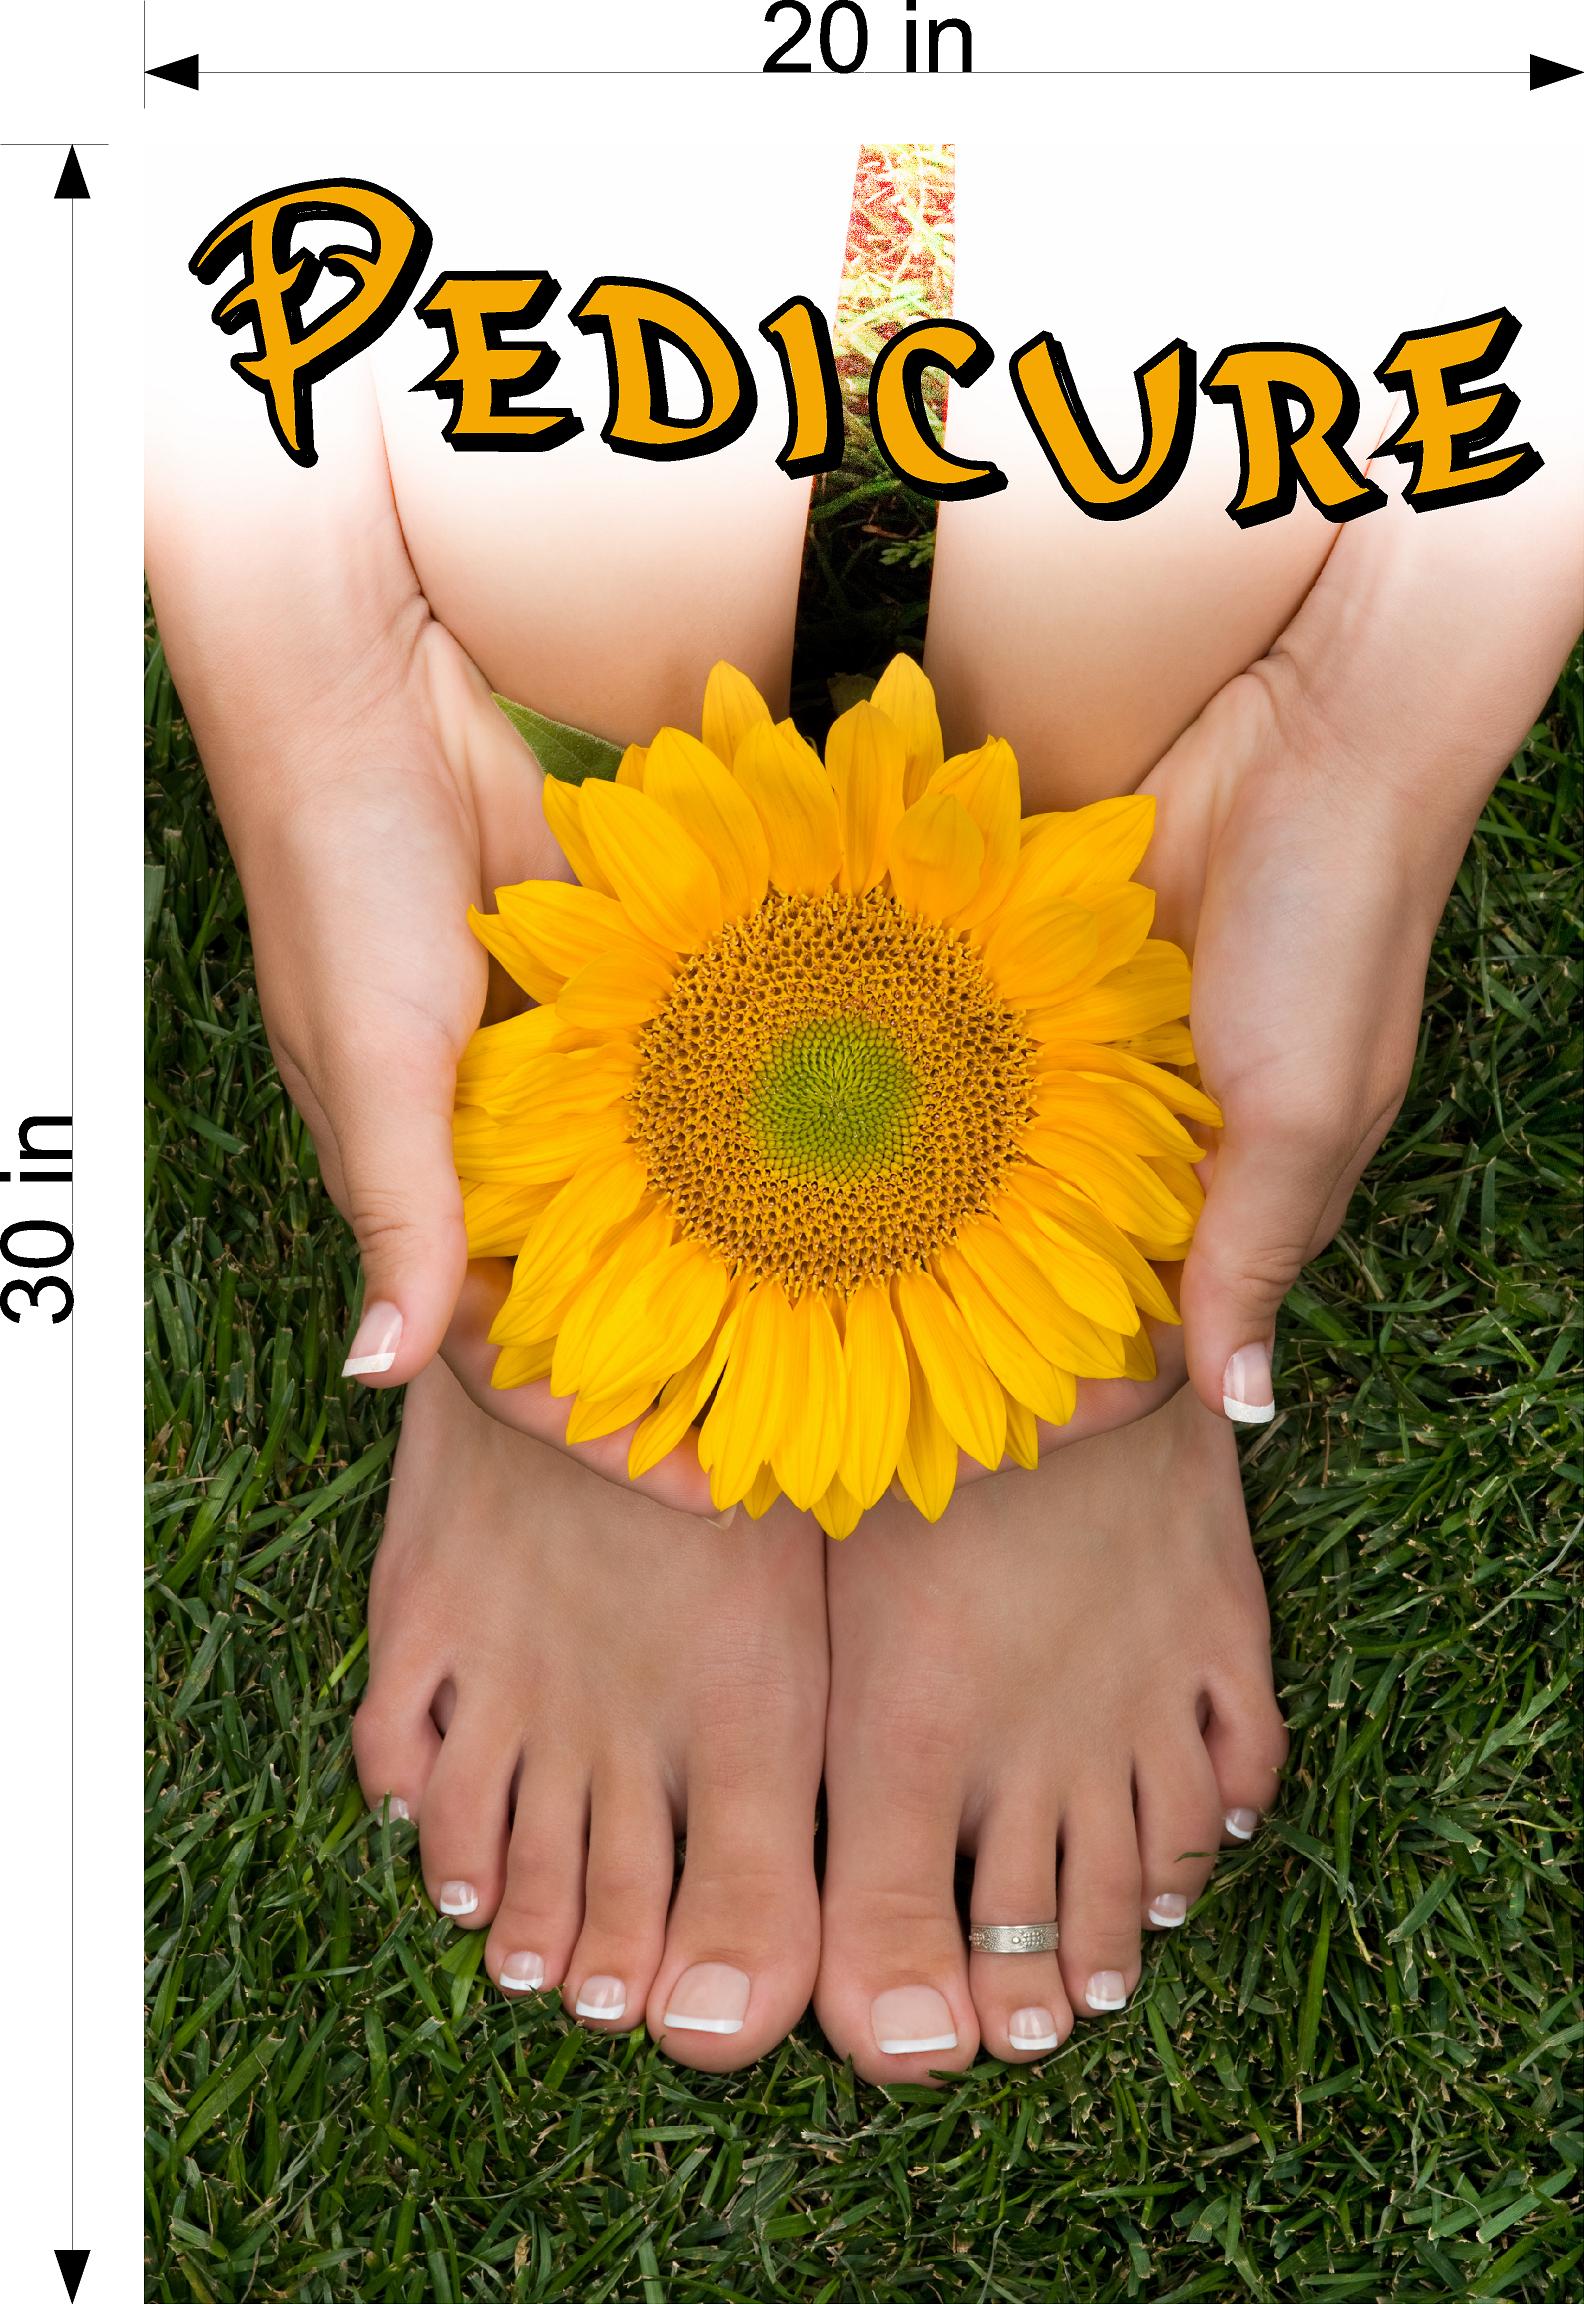 Pedicure 28 Wallpaper Fabric Poster Decal with Adhesive Backing Wall Sticker Decor Indoors Interior Sign Vertical